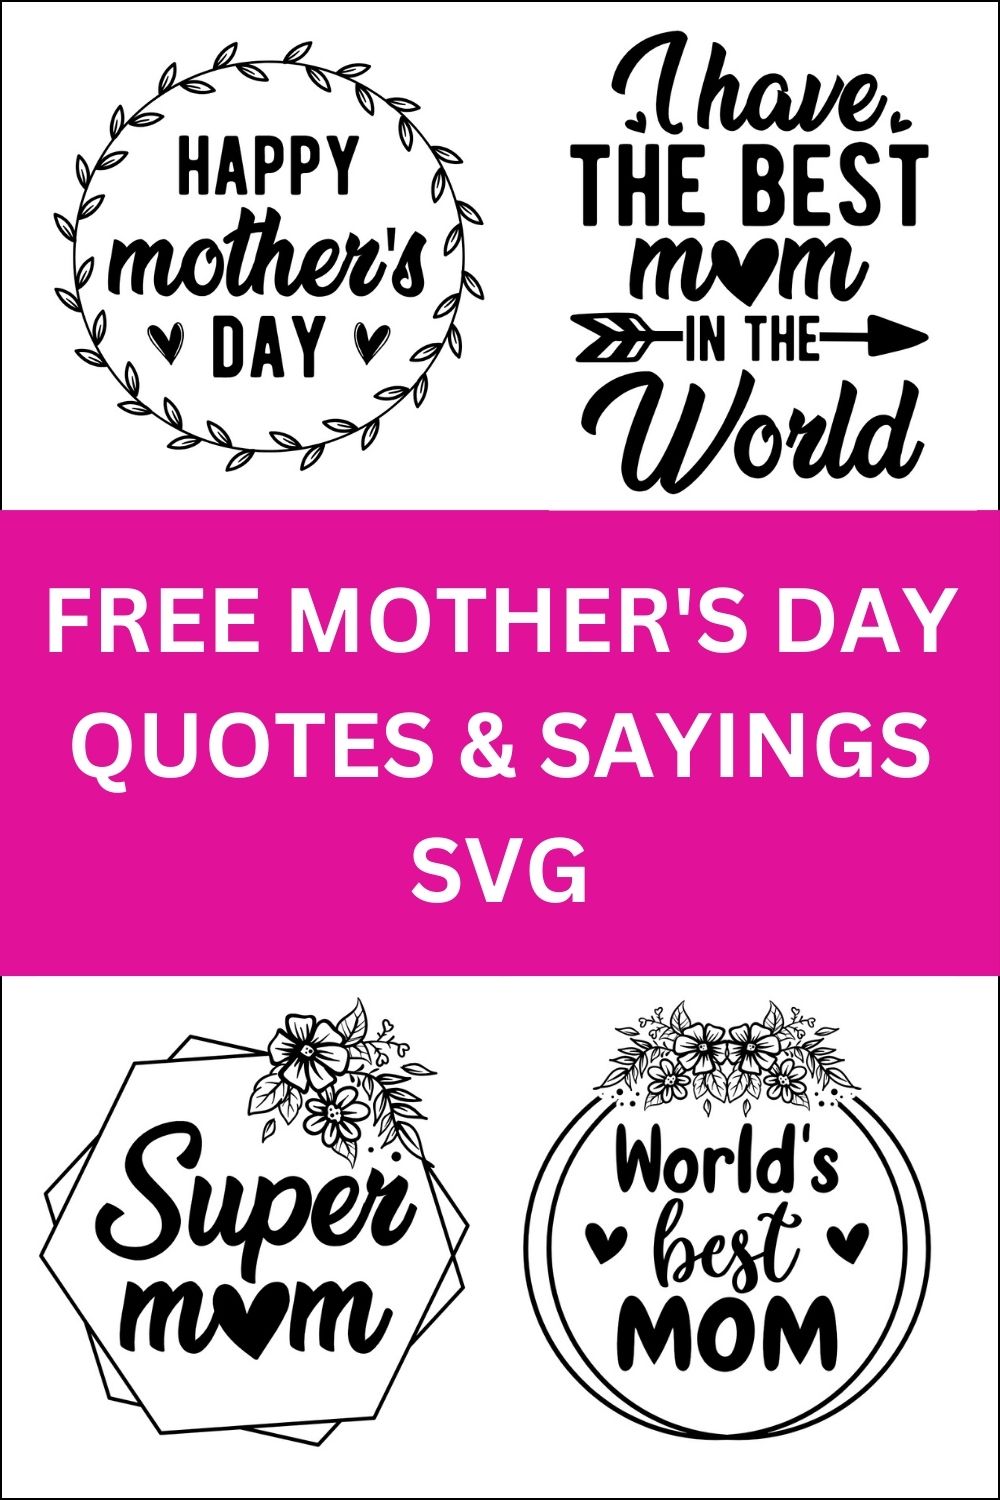 Mother's Day sayings quotes cricut download svg clipart designs